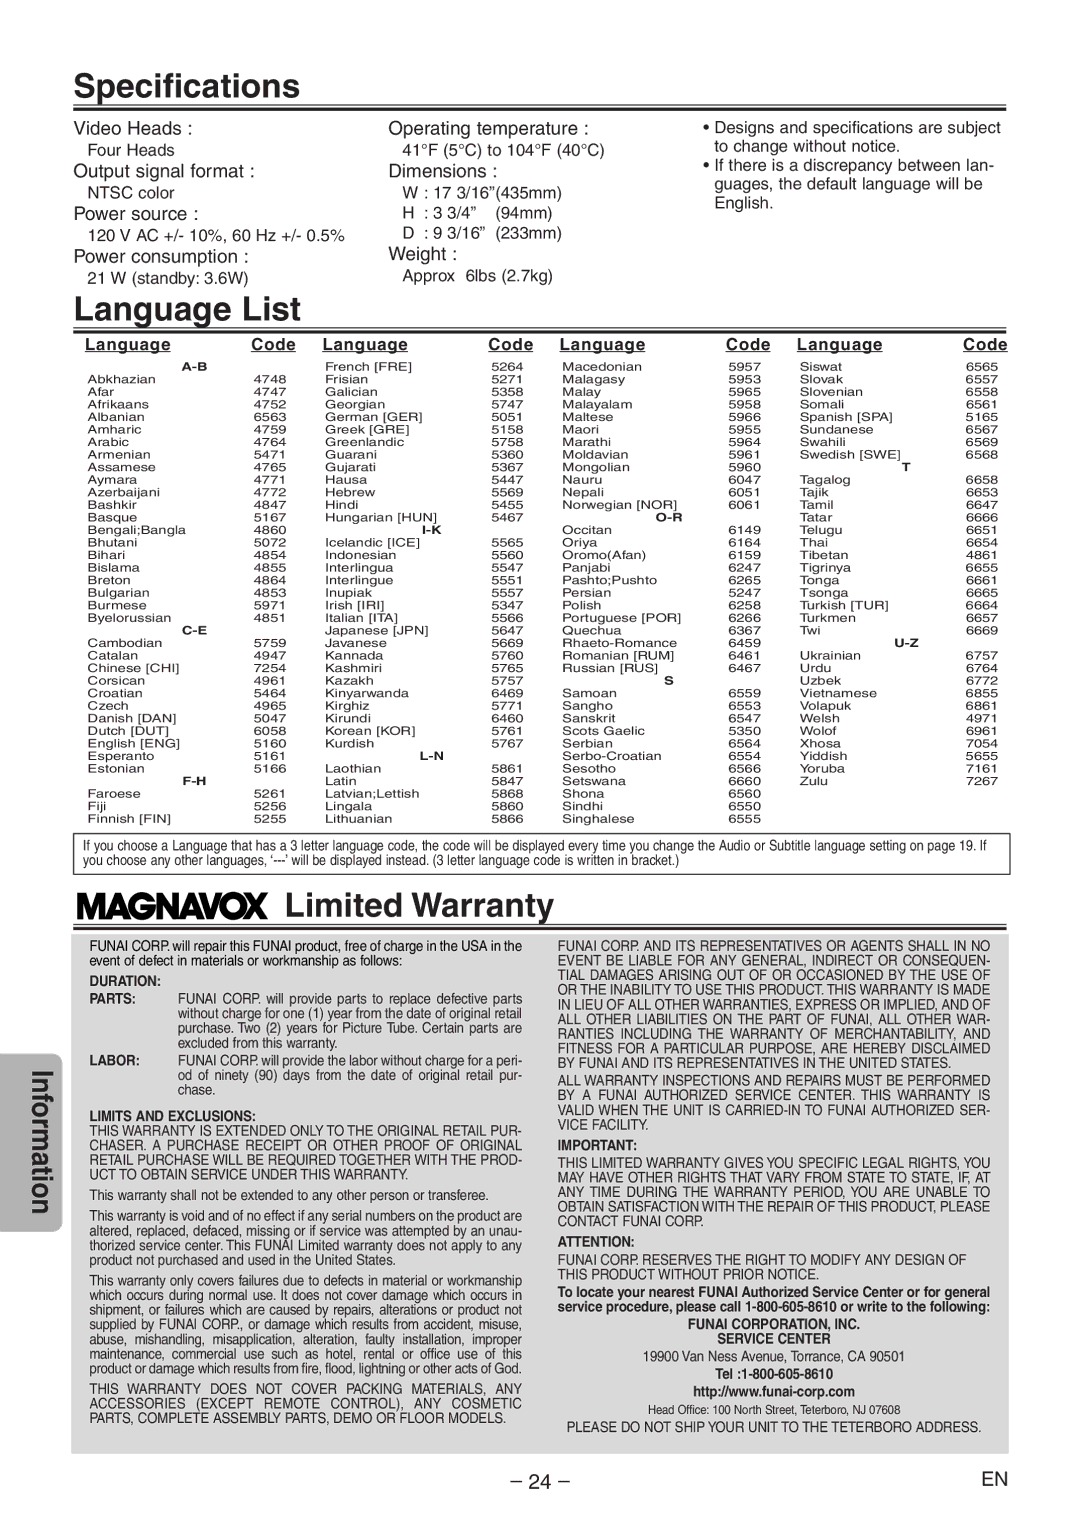 Magnavox MSD804 owner manual Specifications, Language List, Limited Warranty 